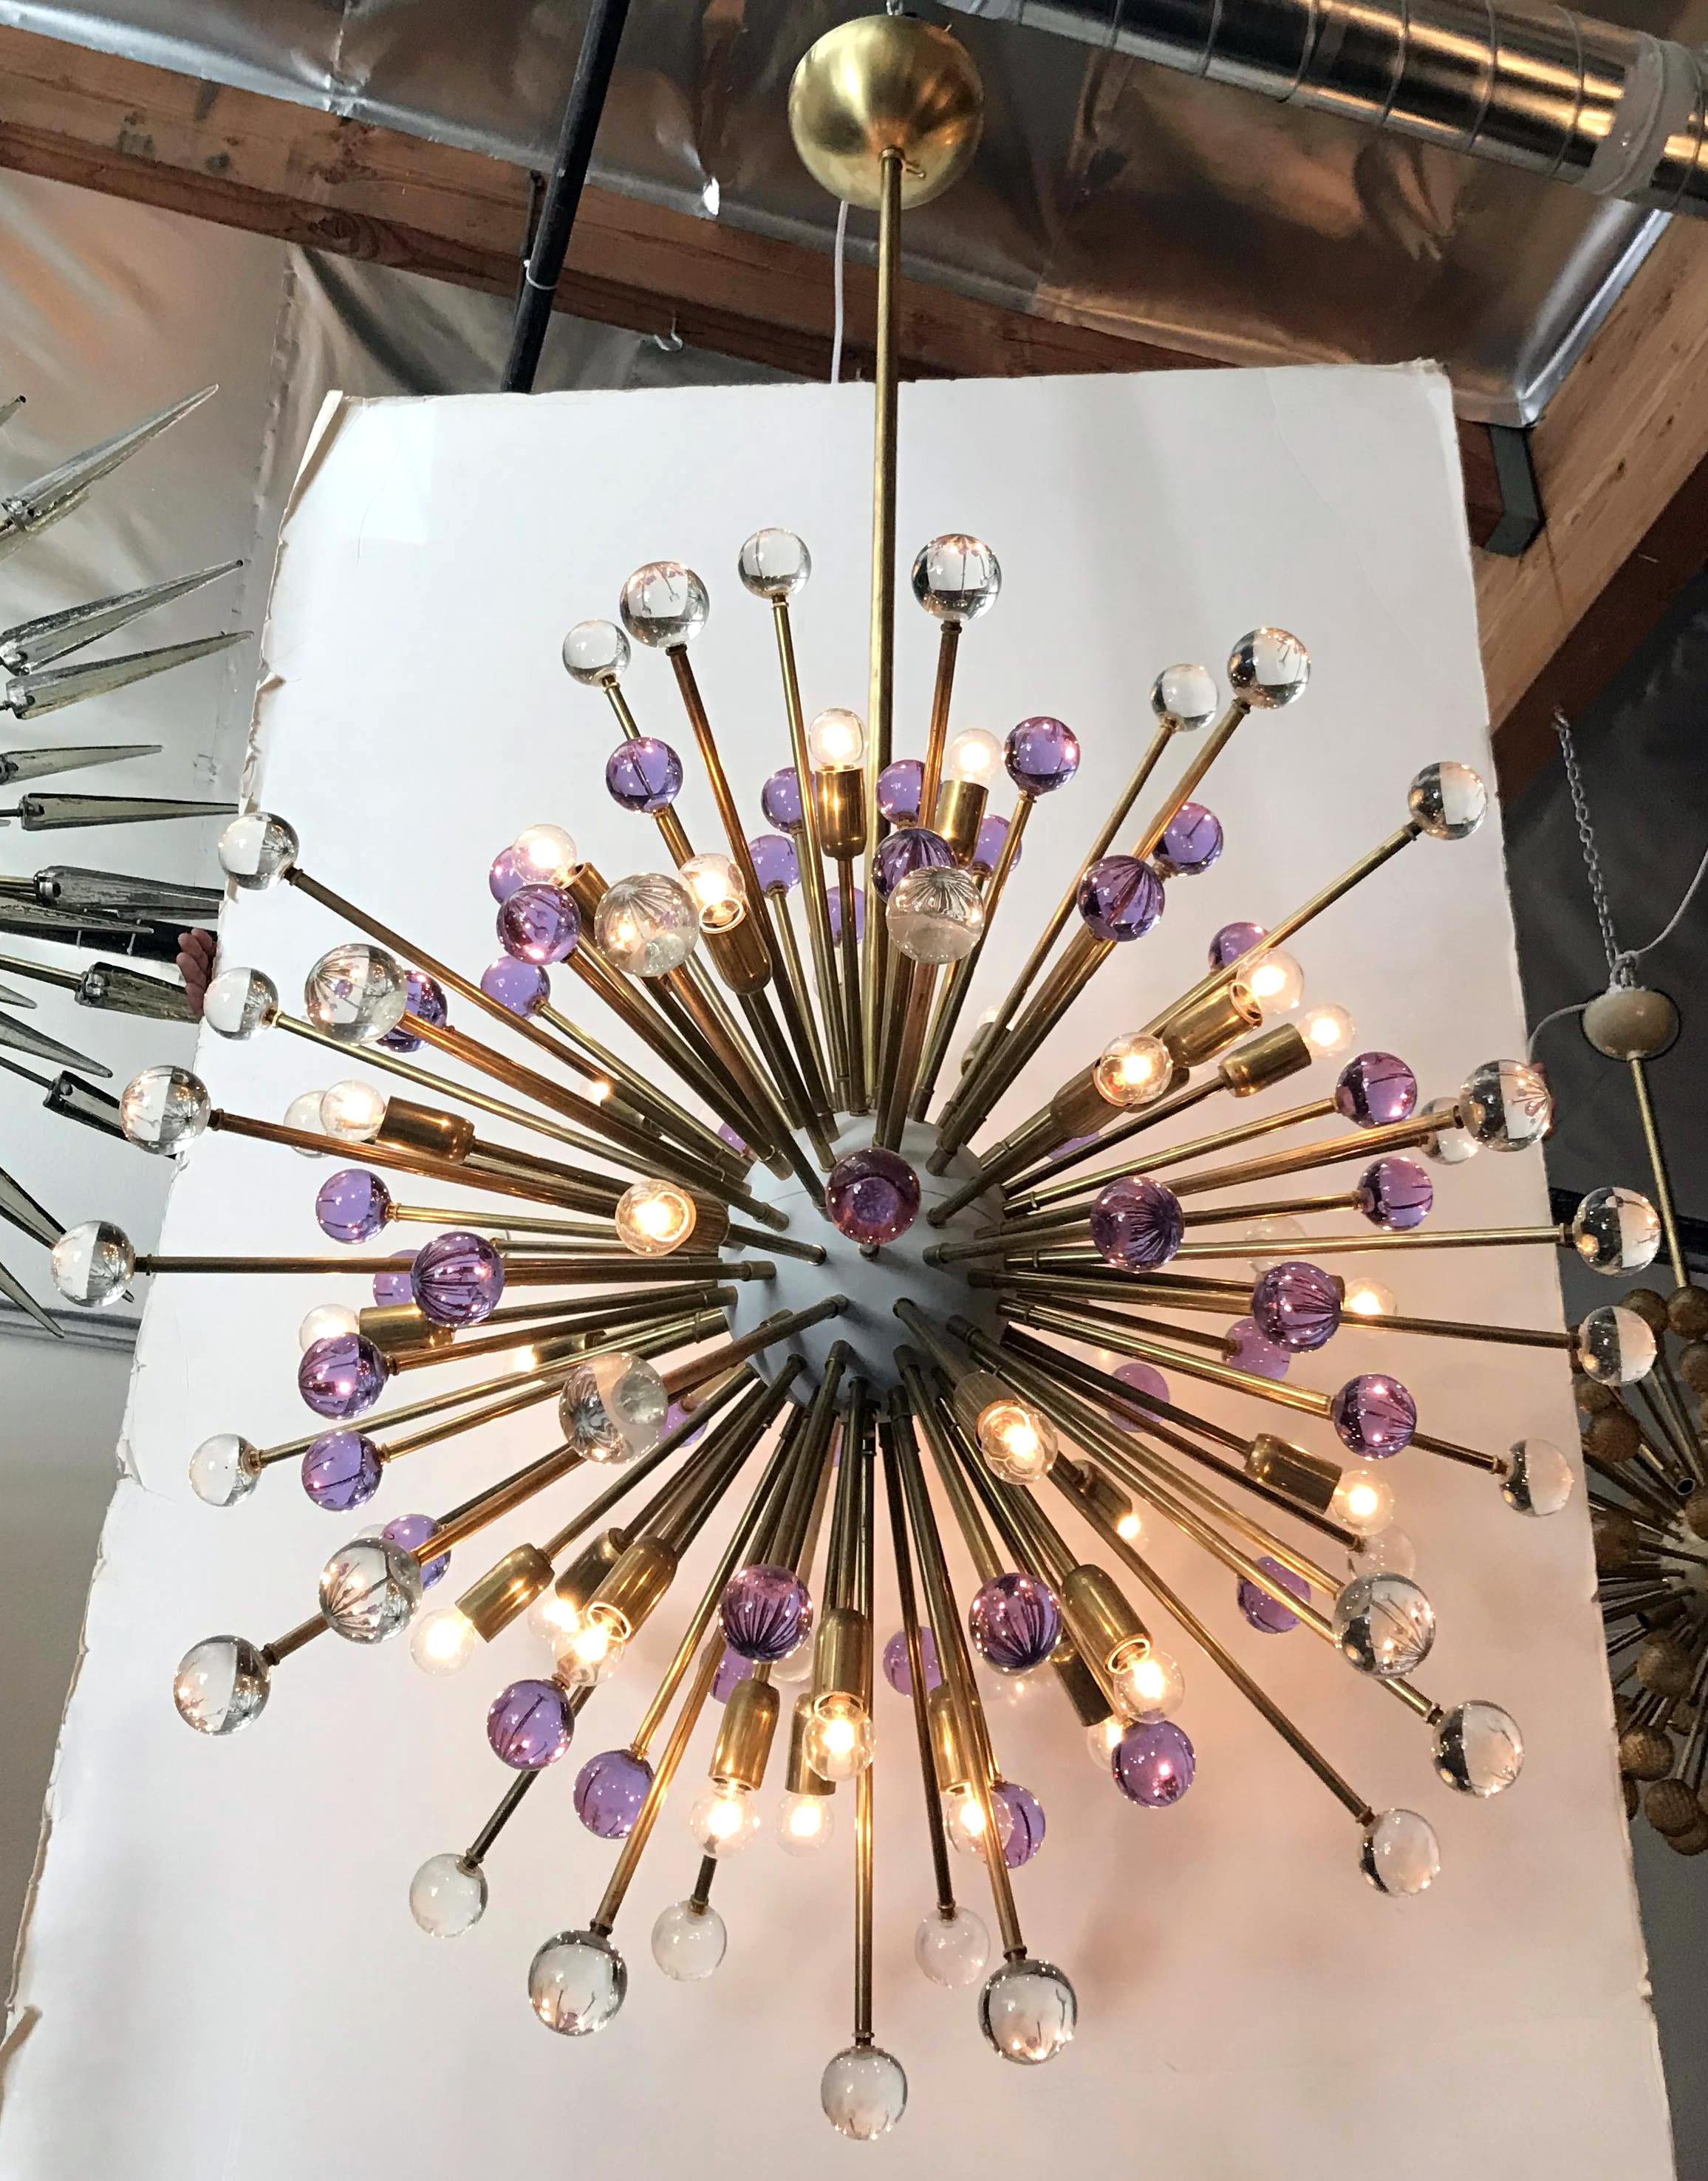 Italian modern Sputnik chandeliers with hand blown clear and purple Murano glass spheres, mounted on natural brass frames with white enameled centers / Designed by Fabio Bergomi for Fabio Ltd / Made in Italy
30 lights / E12 type / max 40W